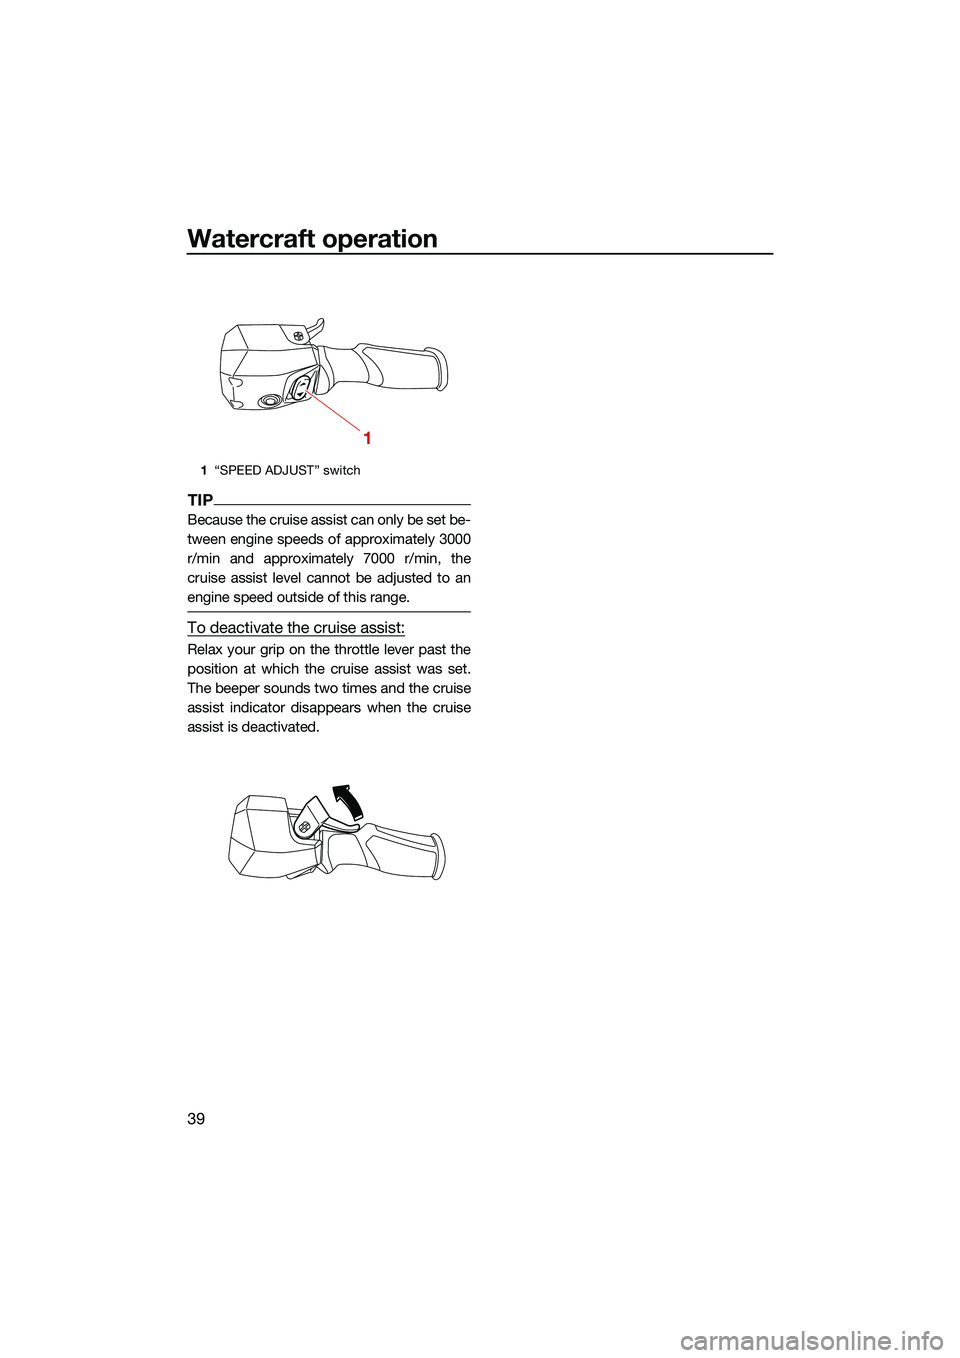 YAMAHA FX HO CRUISER 2022 Service Manual Watercraft operation
39
TIP
Because the cruise assist can only be set be-
tween engine speeds of approximately 3000
r/min and approximately 7000 r/min, the
cruise assist level cannot be adjusted to an